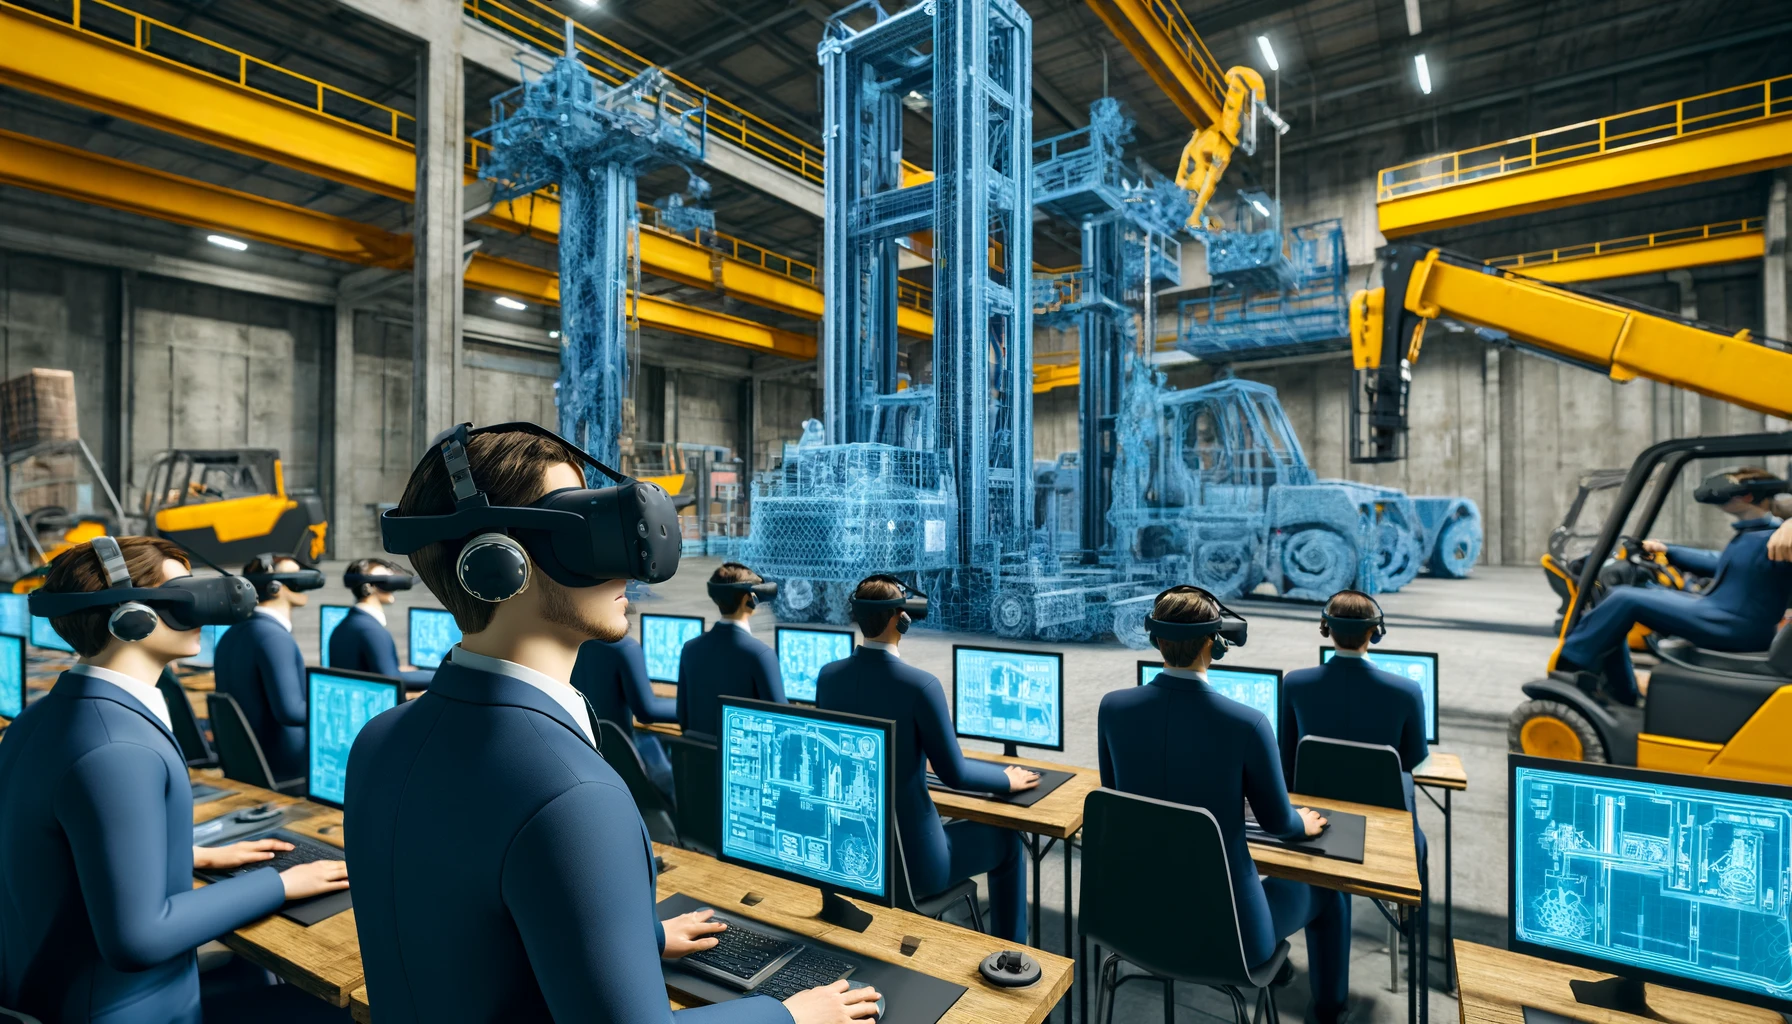 A training session in an industrial environment where operators use virtual reality to practice operating heavy machinery. The image shows a group of male and female workers wearing VR helmets and participating in a simulated environment that mimics the operation of cranes and forklifts.